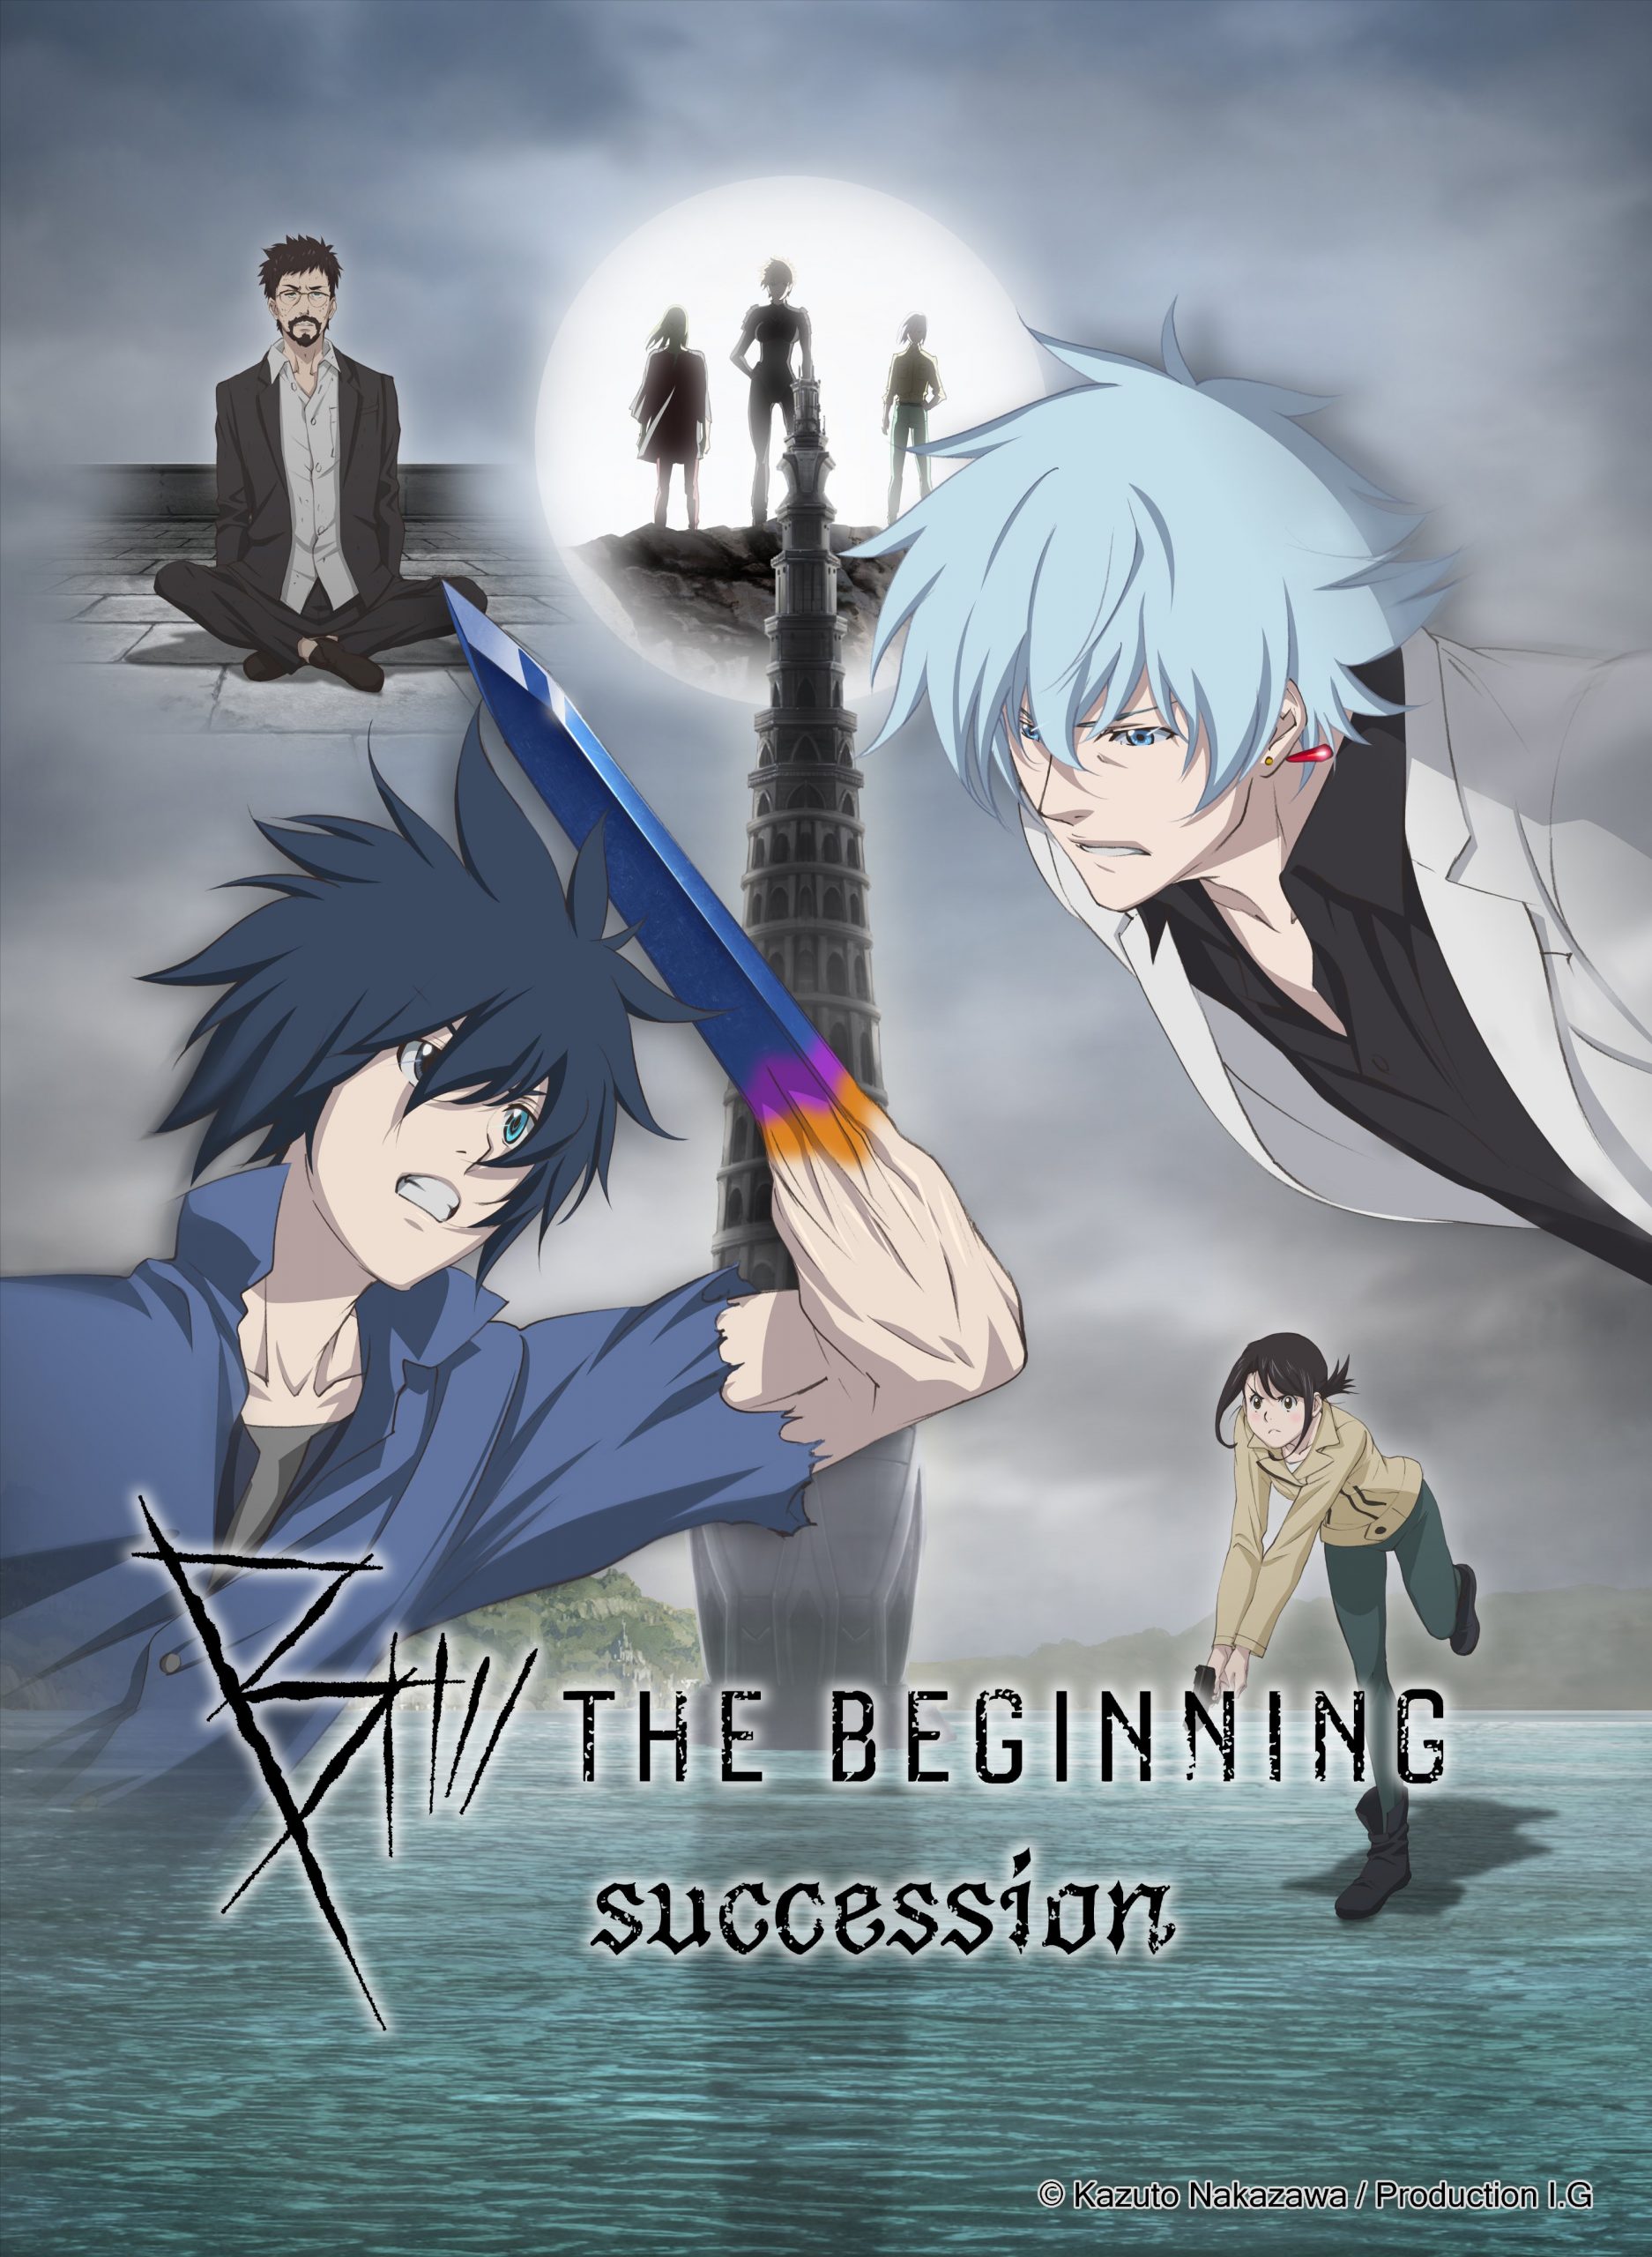 B-The-Beginning-Succession-KV-scaled B: The Beginning Succession